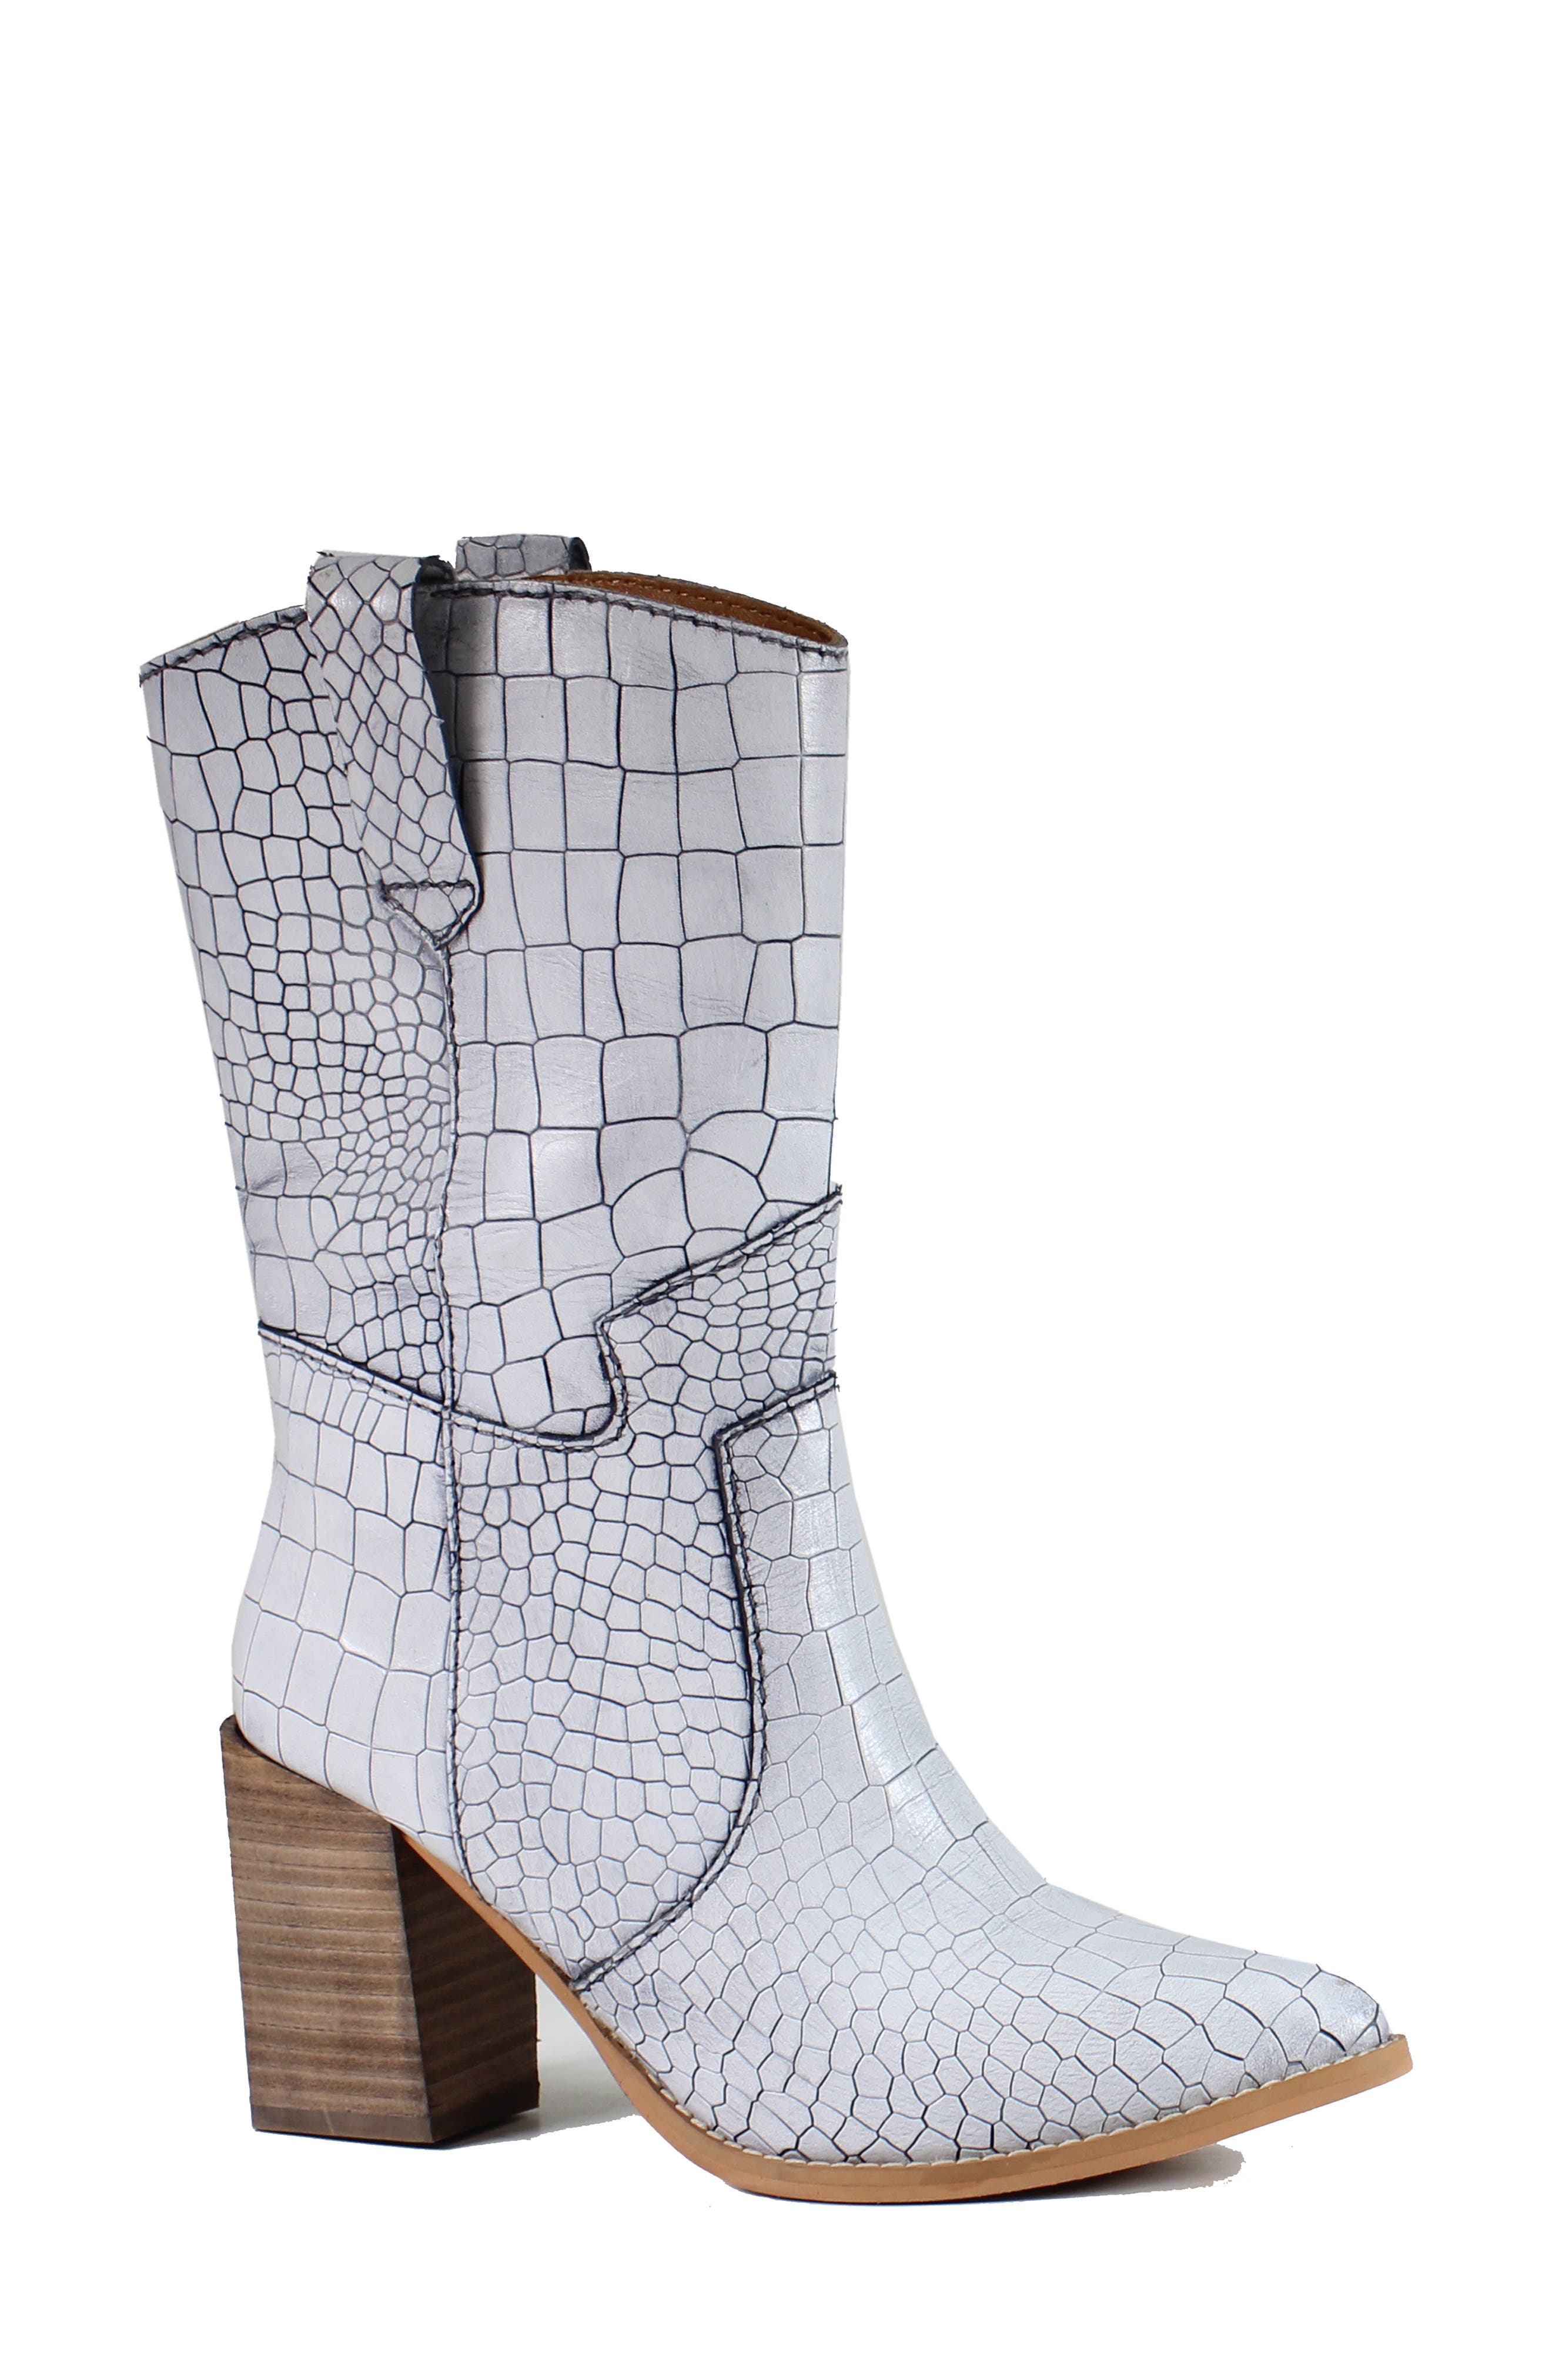 Diba True Trudy Moody Western Boot in White at Nordstrom